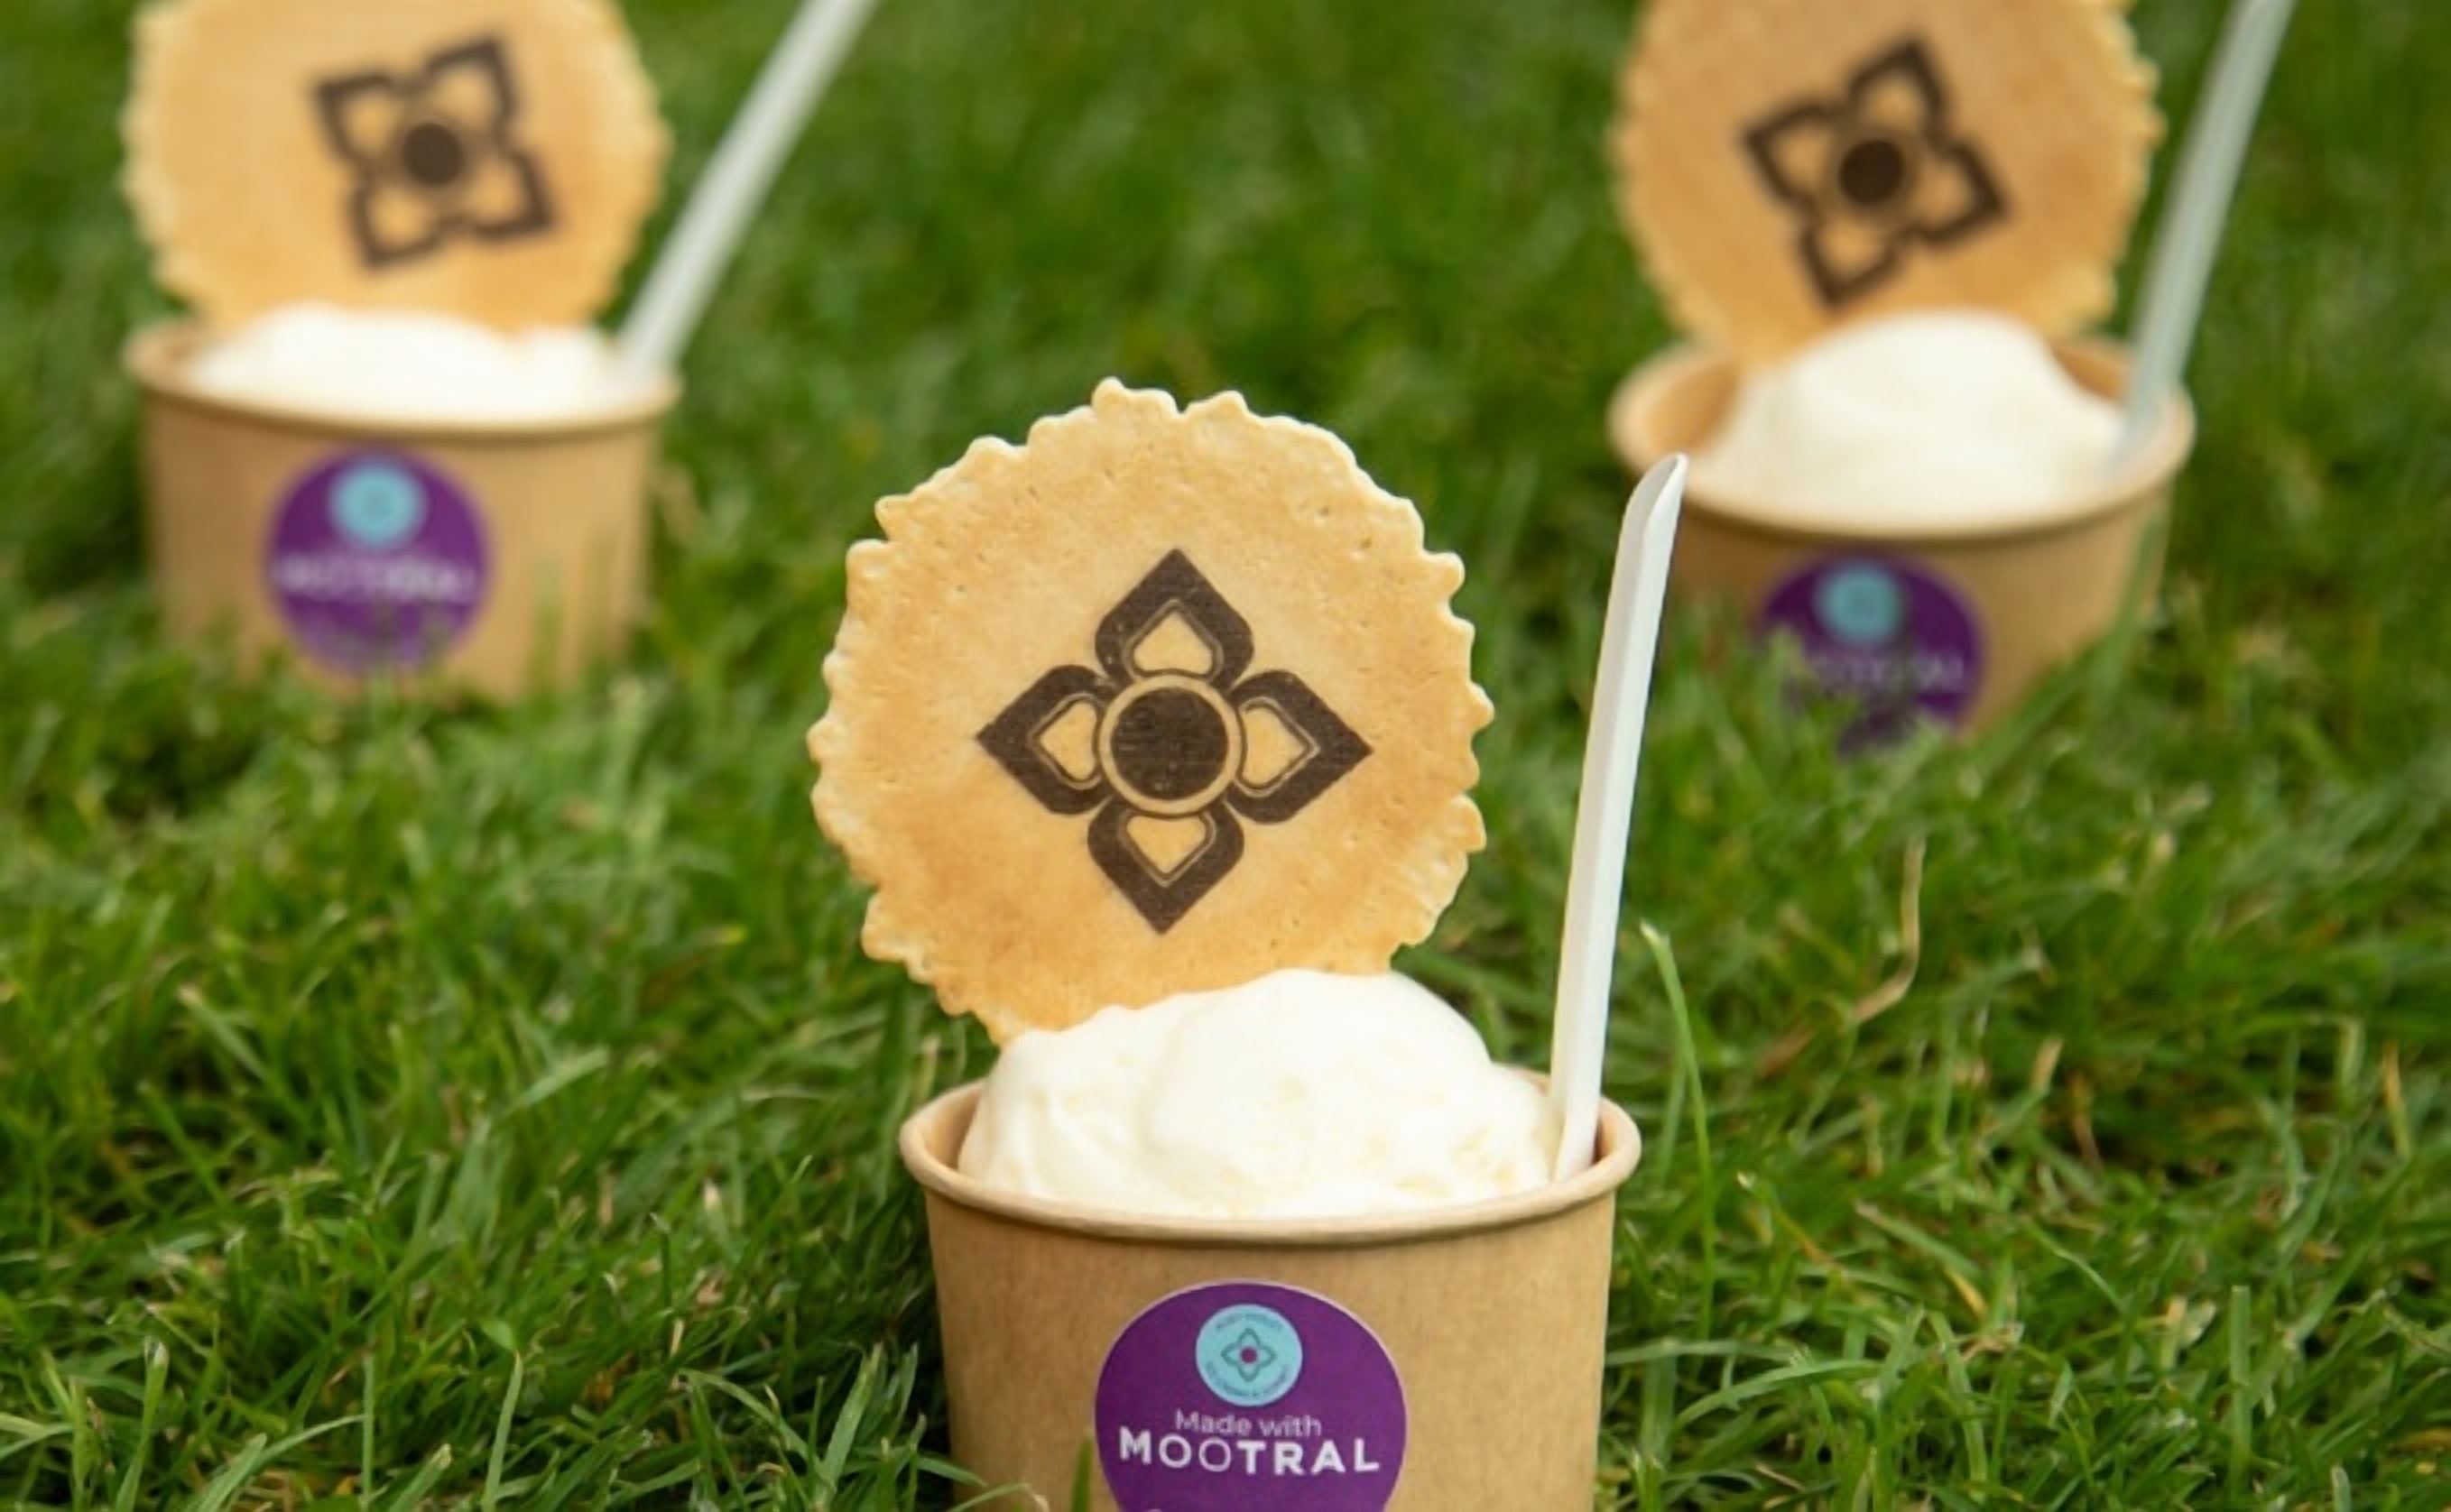 KnowESG_Mootral Debuts World First Climate-Friendly Ice Cream